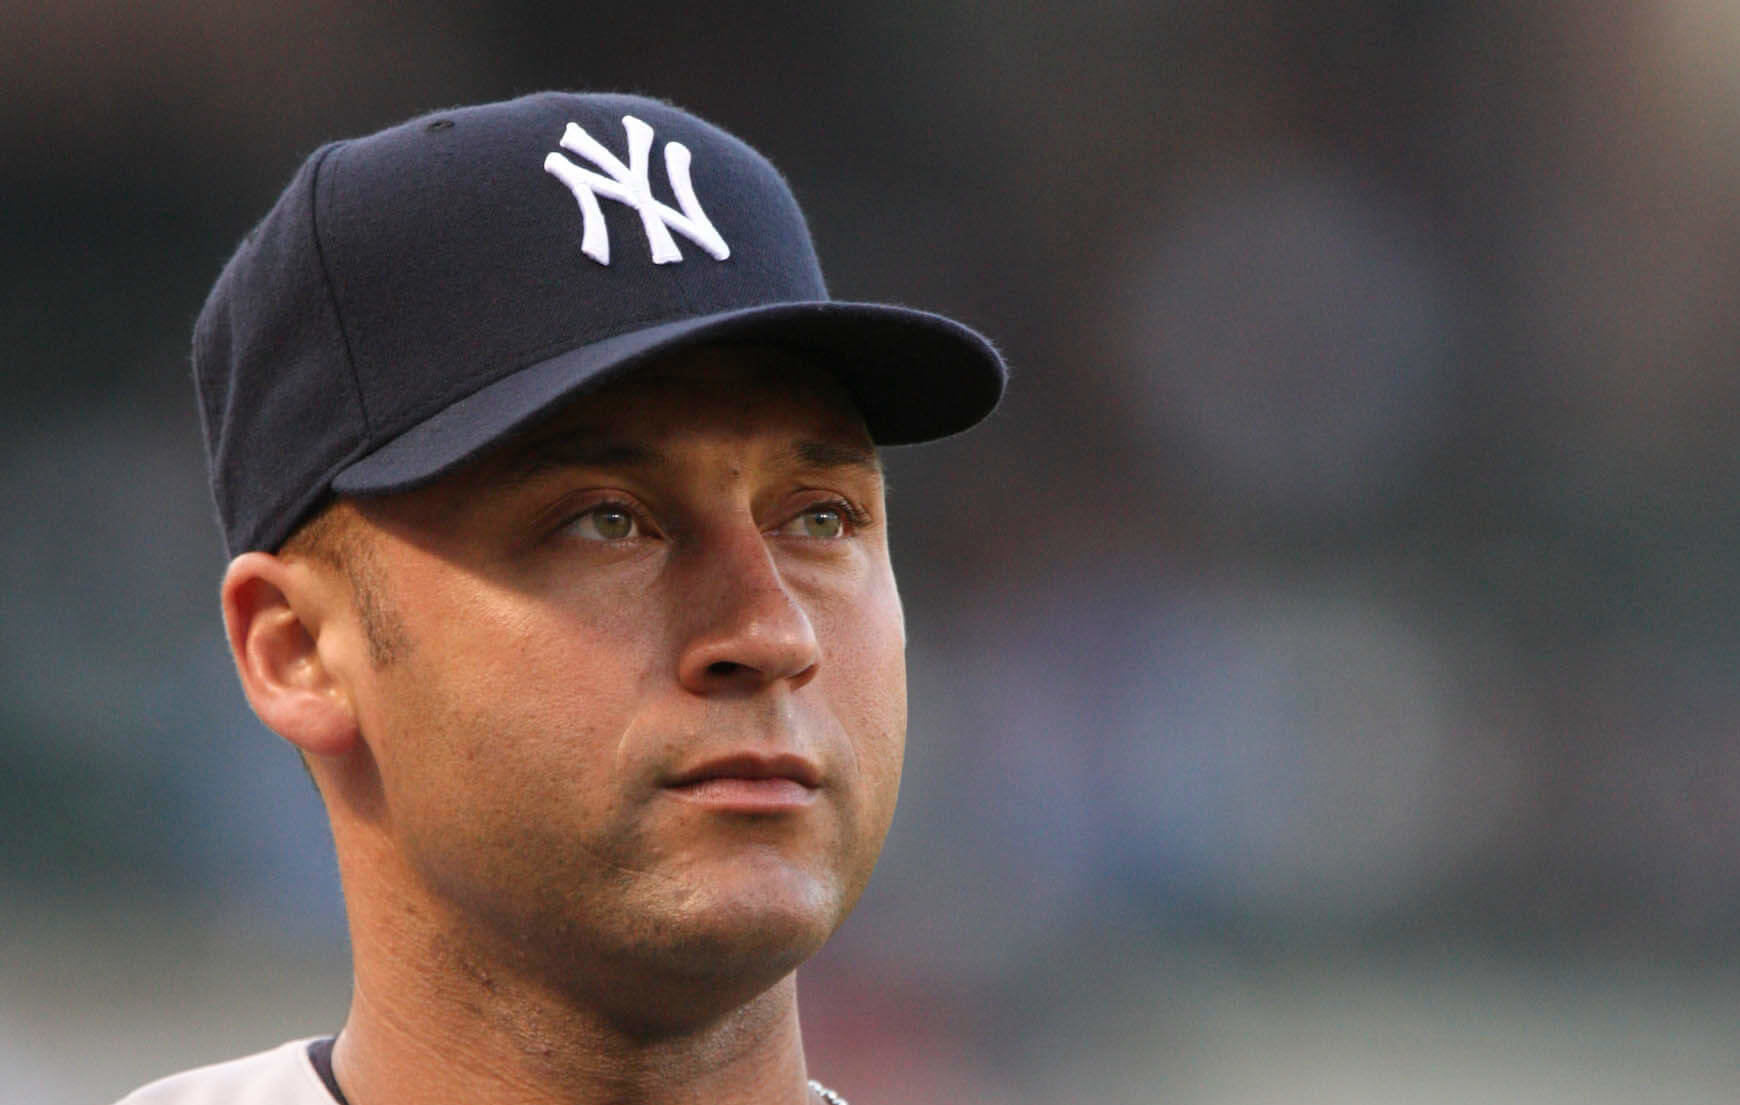 Jeter in KC is a regular player' Manny Ramirez takes swing at Yankees  captain, fans